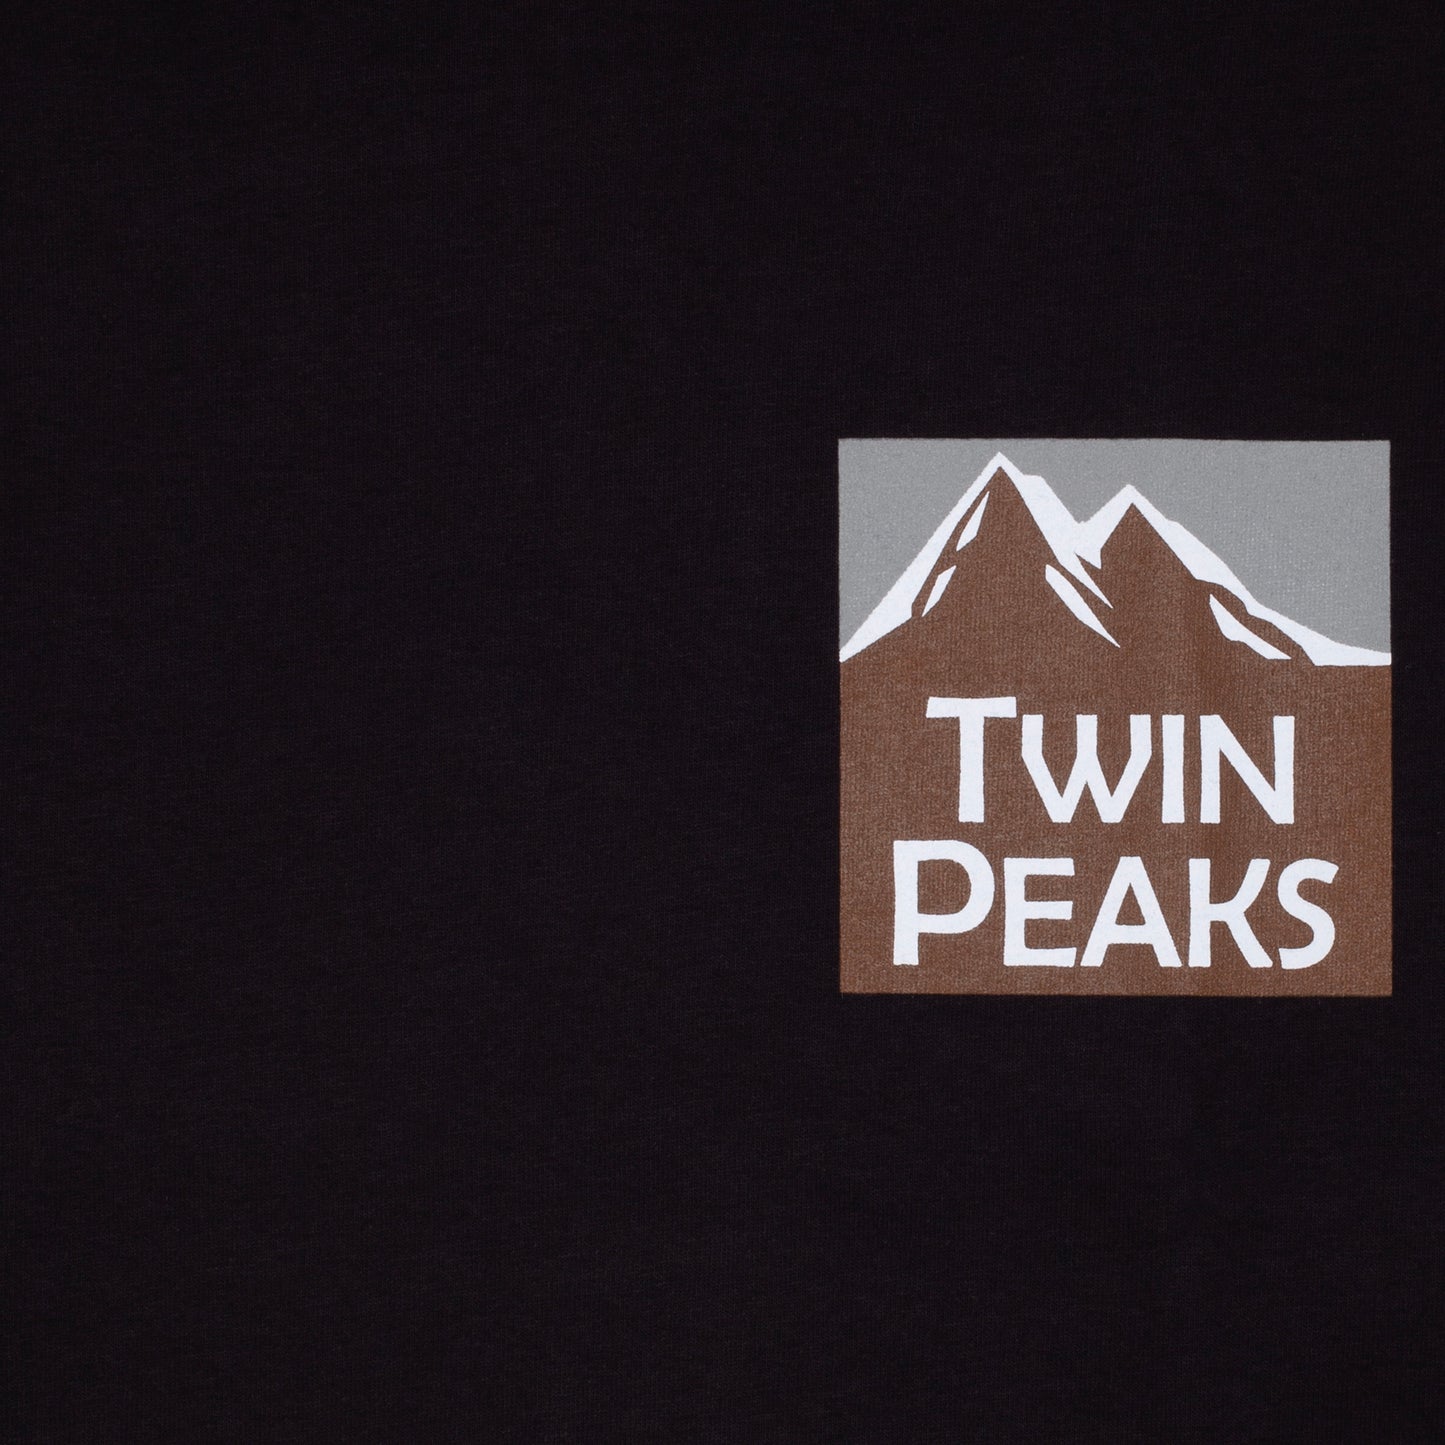 Twin Peaks S/S Blk(size options listed)